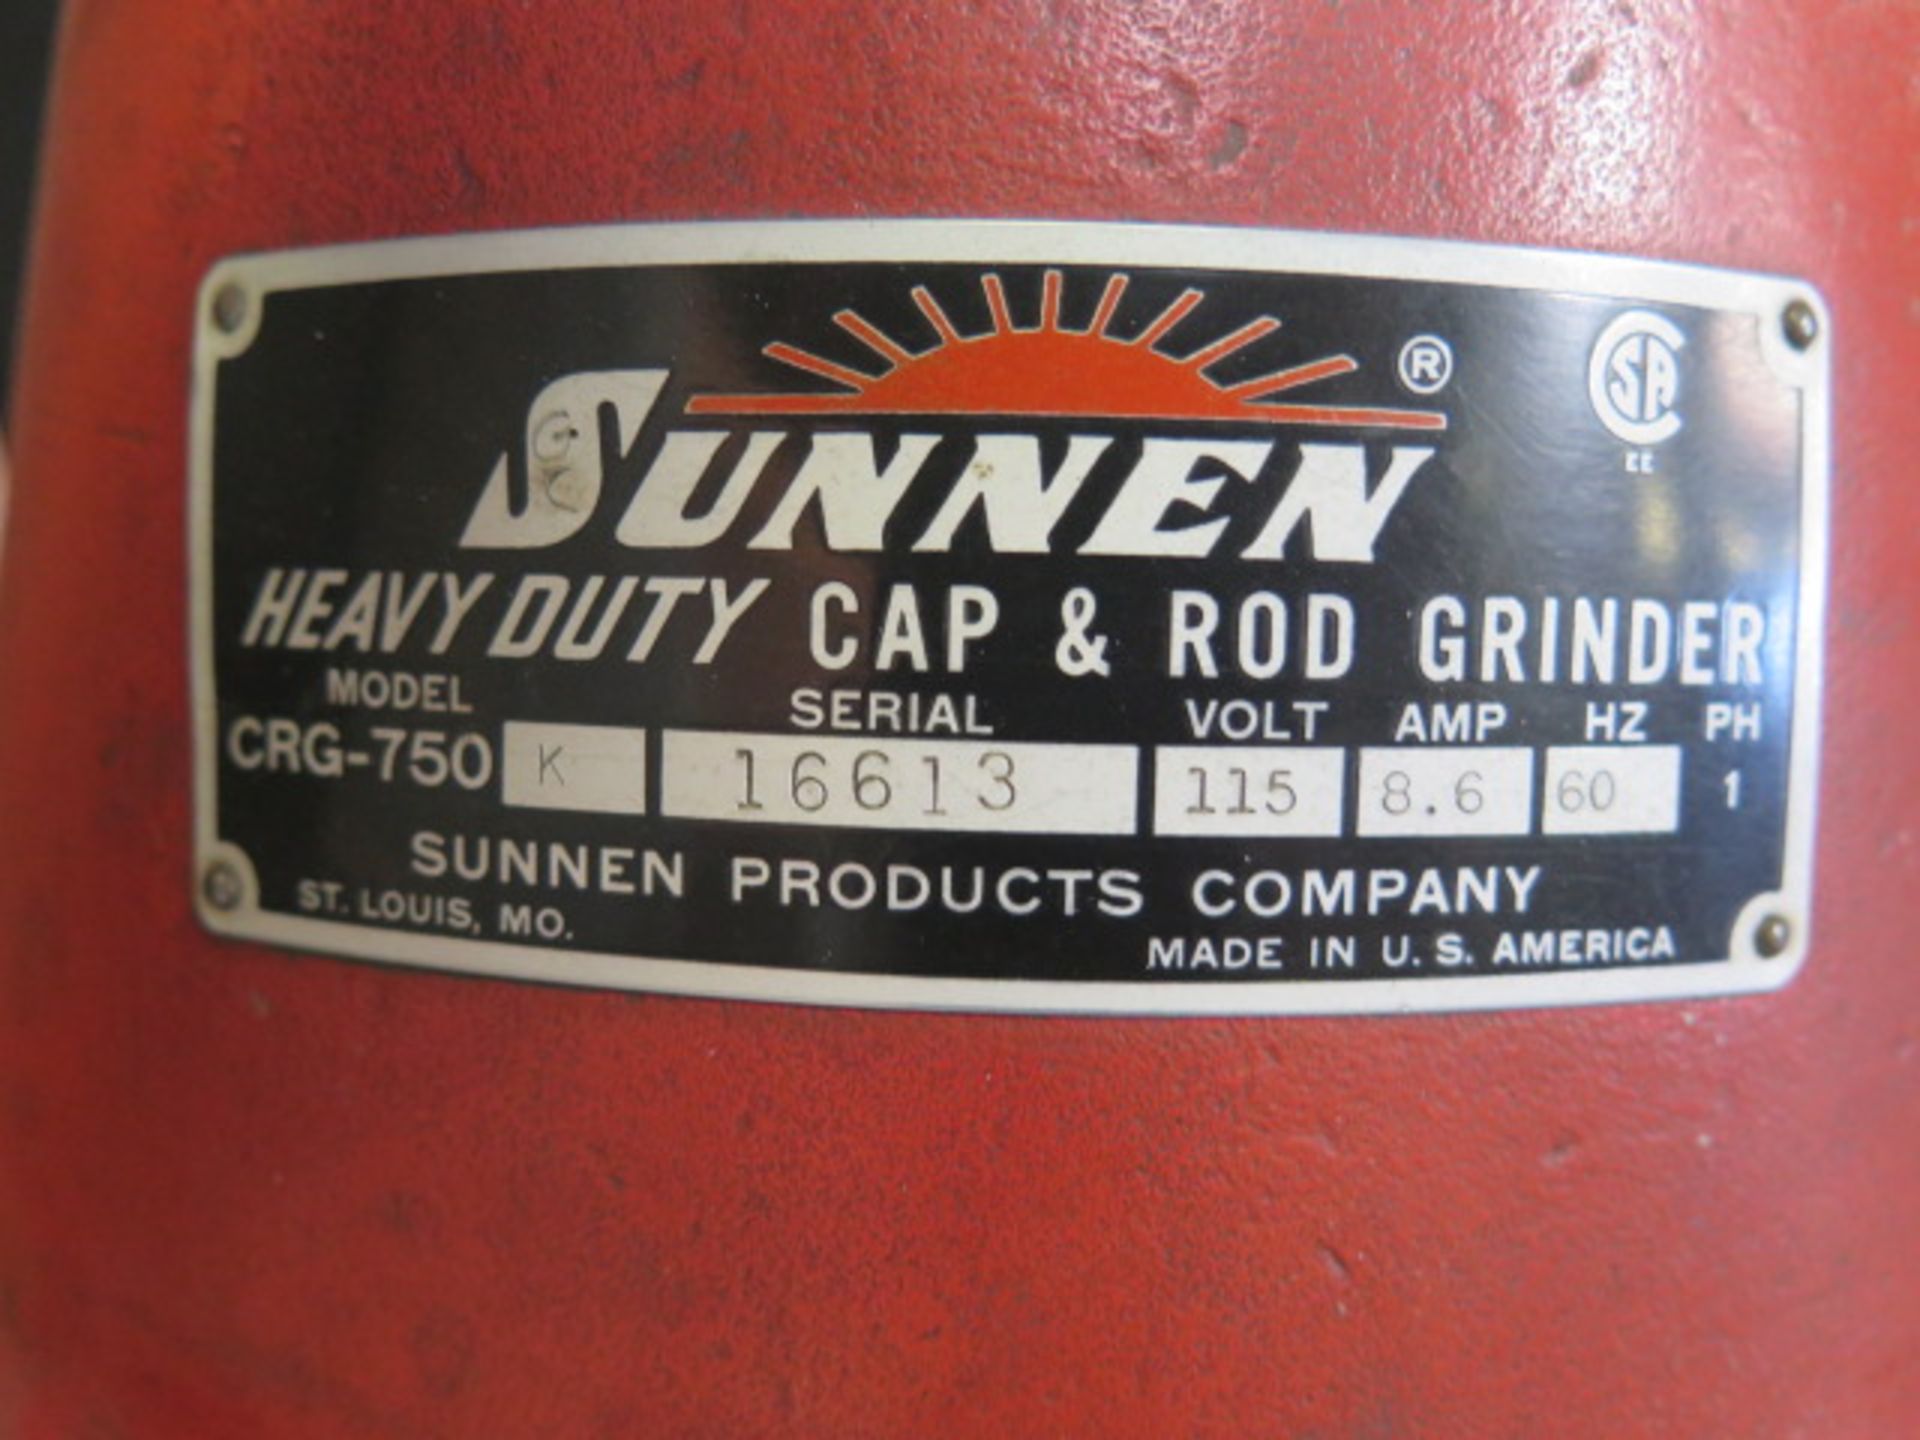 Sunnen CRG-750 Heavy Duty Cap and Rod Grinder s/n 16613 (SOLD AS-IS - NO WARRANTY) - Image 7 of 7